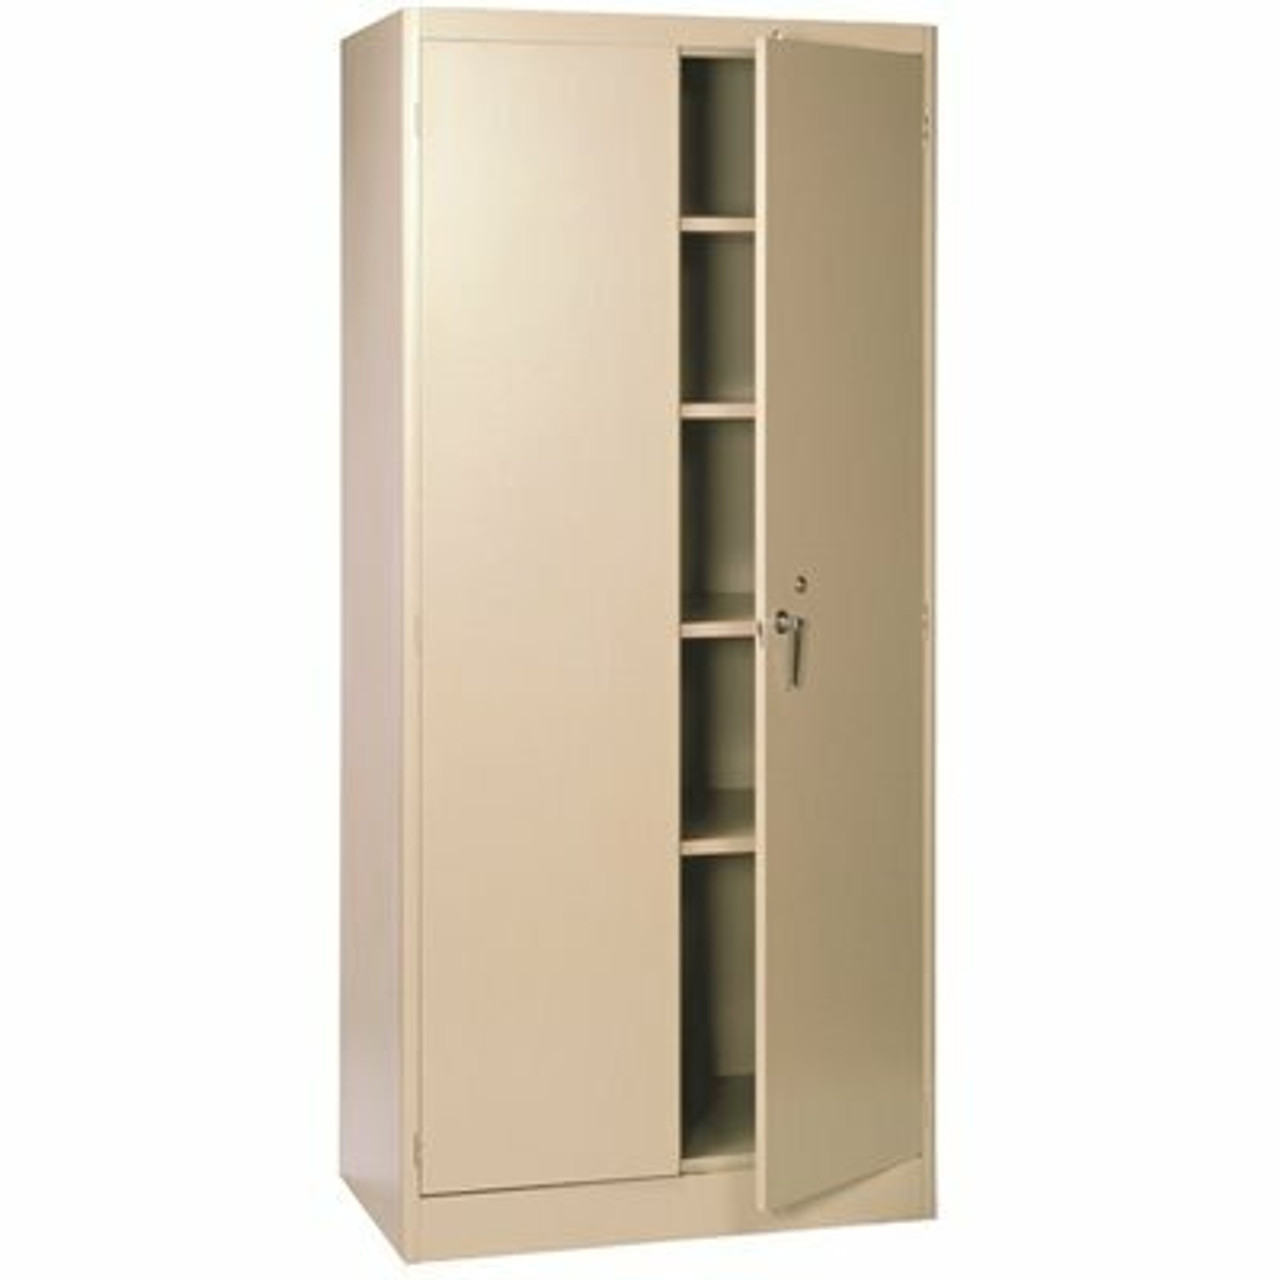 Lyon Workspace Products 1000 Series 36 In. X 24 In. X 78 In. Steel Storage Cabinet - 1801440